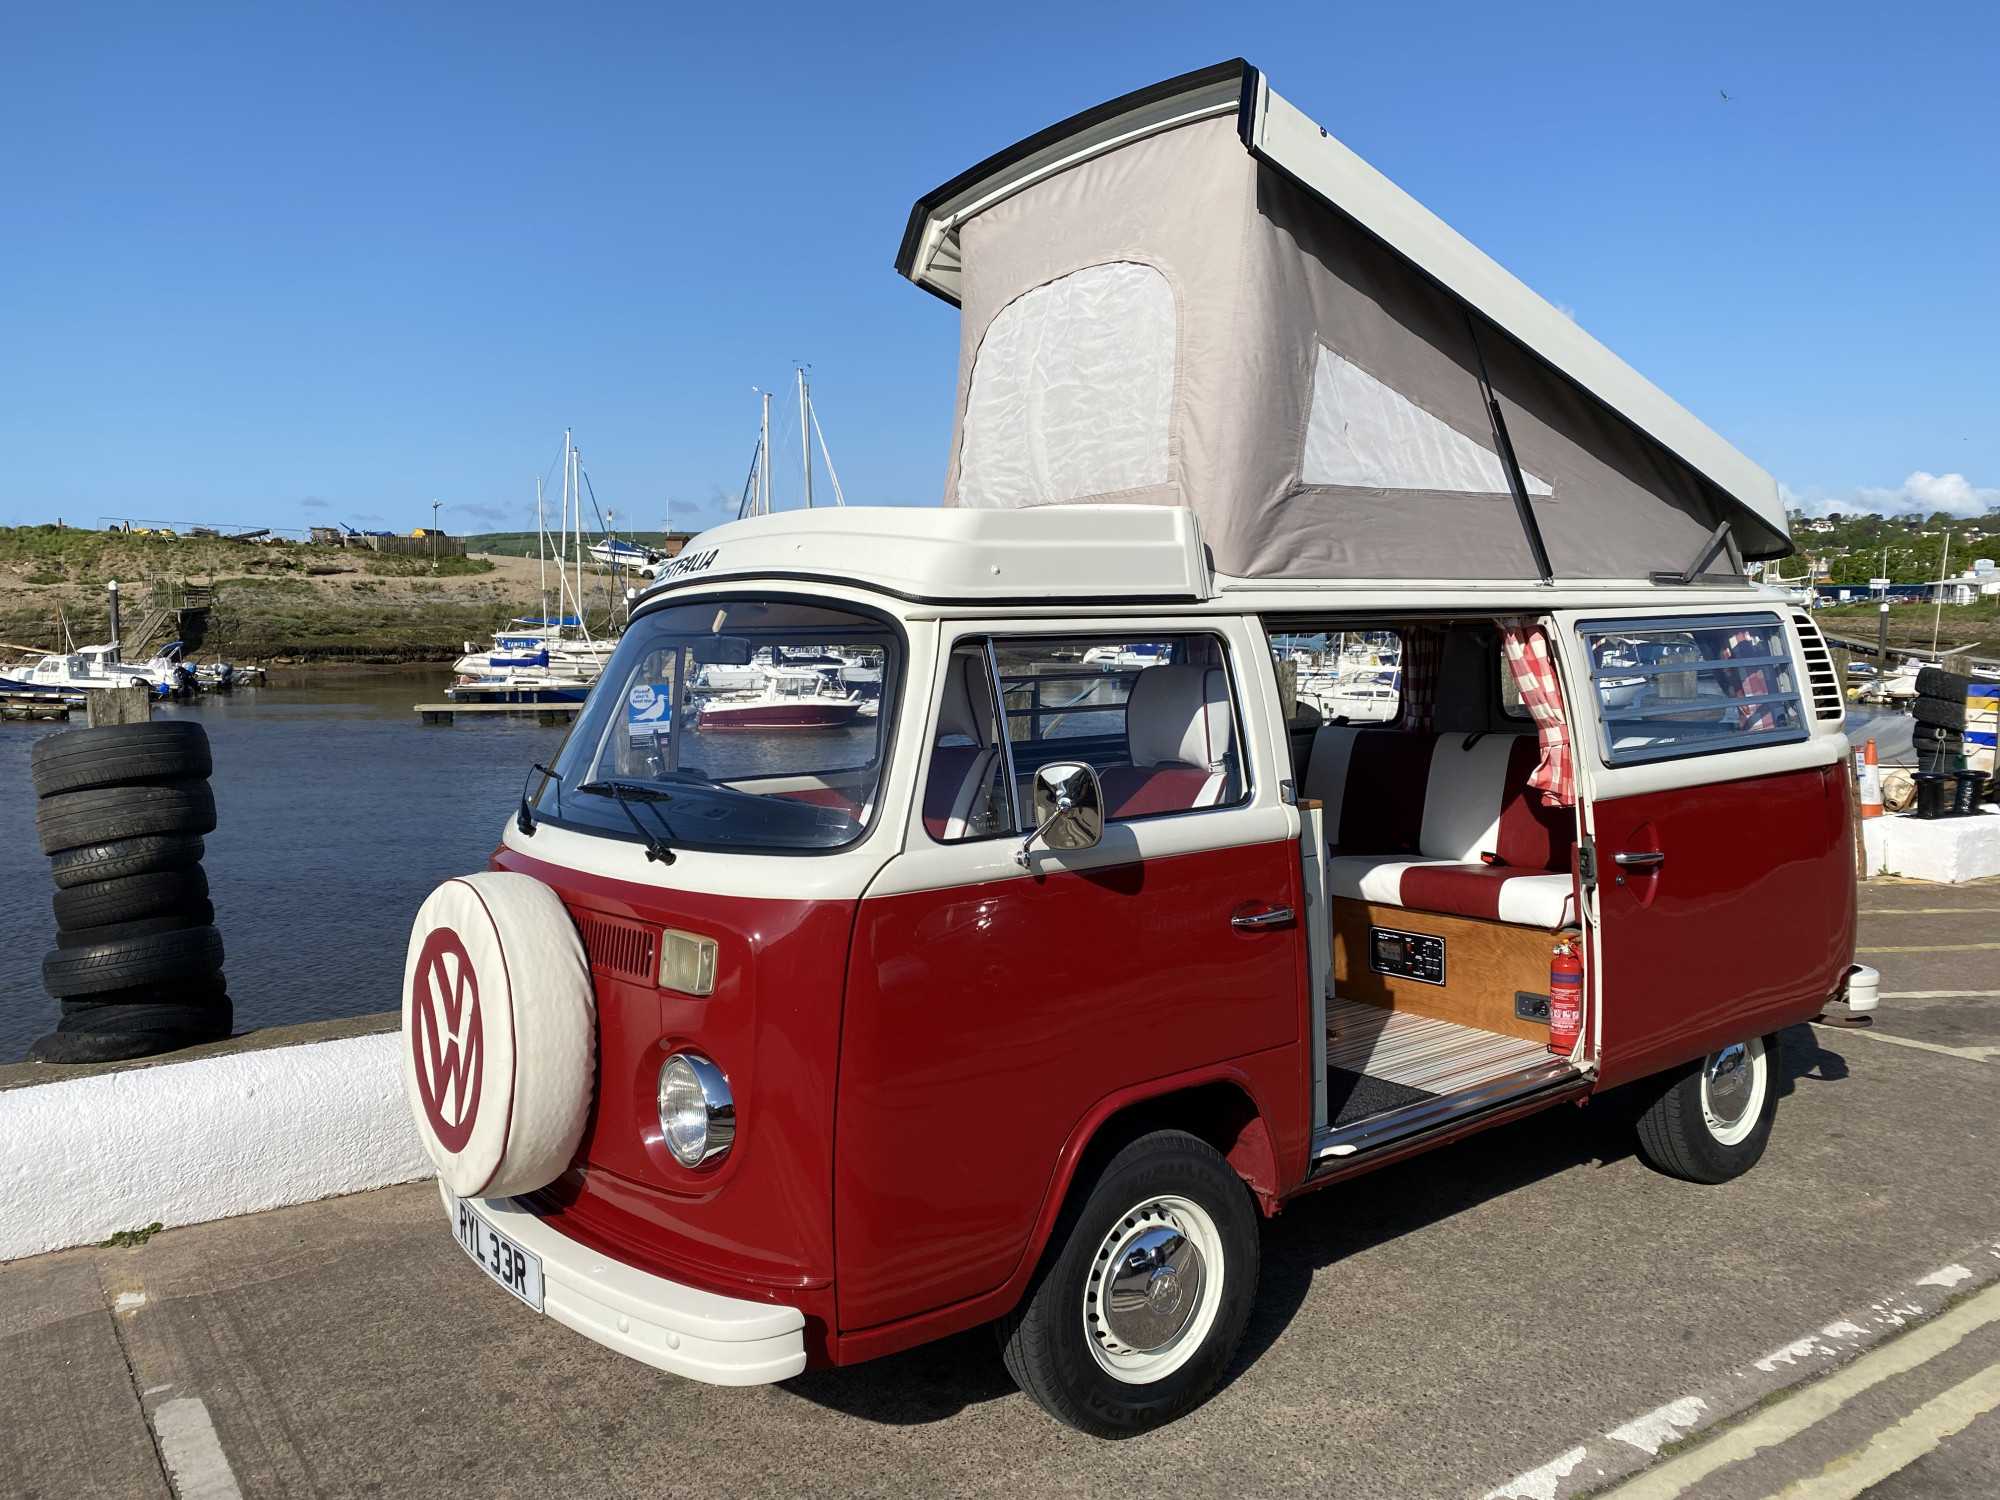 A VW T2 Classic Campervan called Ruby-Rose and VW Campervan Ruby Rose in Devon for hire in Colyton, Devon